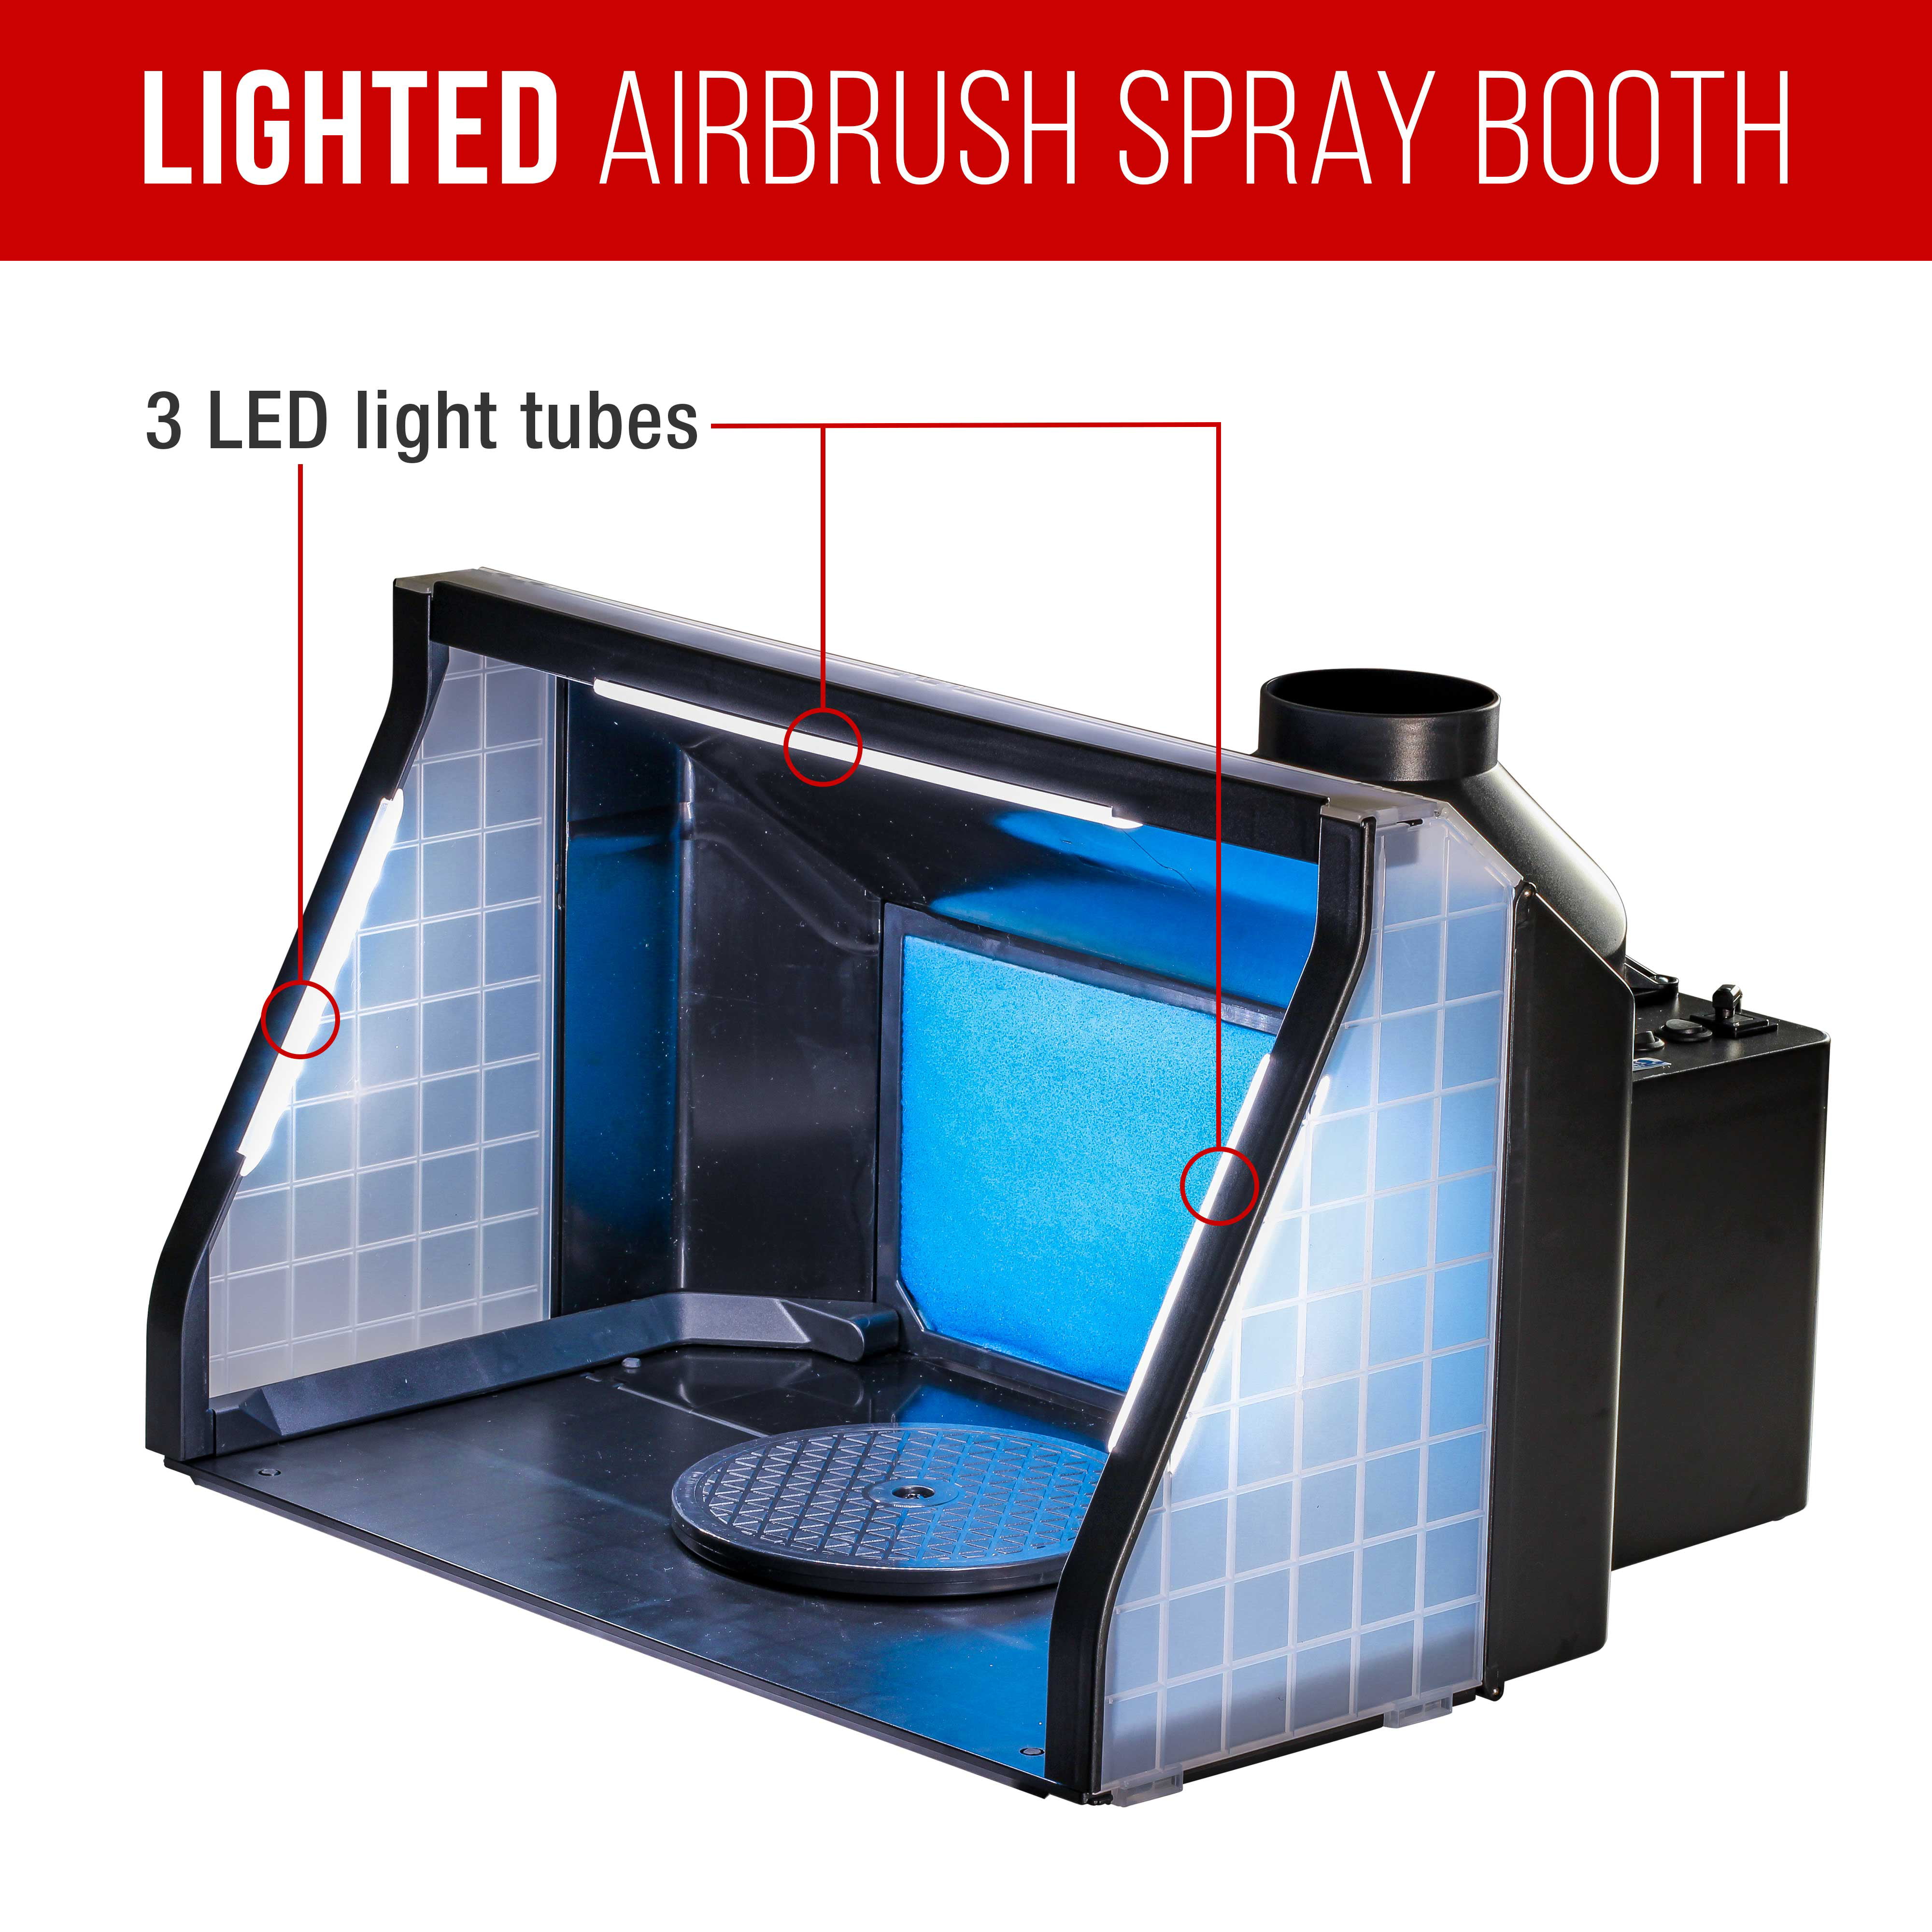 Spray Booth, Airbrush Lighted Hobby Spray Booth Kit with LED Light, 360°  Turntable, Dual Fans, Filter, Extension Hose, Airbrush Spray Booth for  Manual